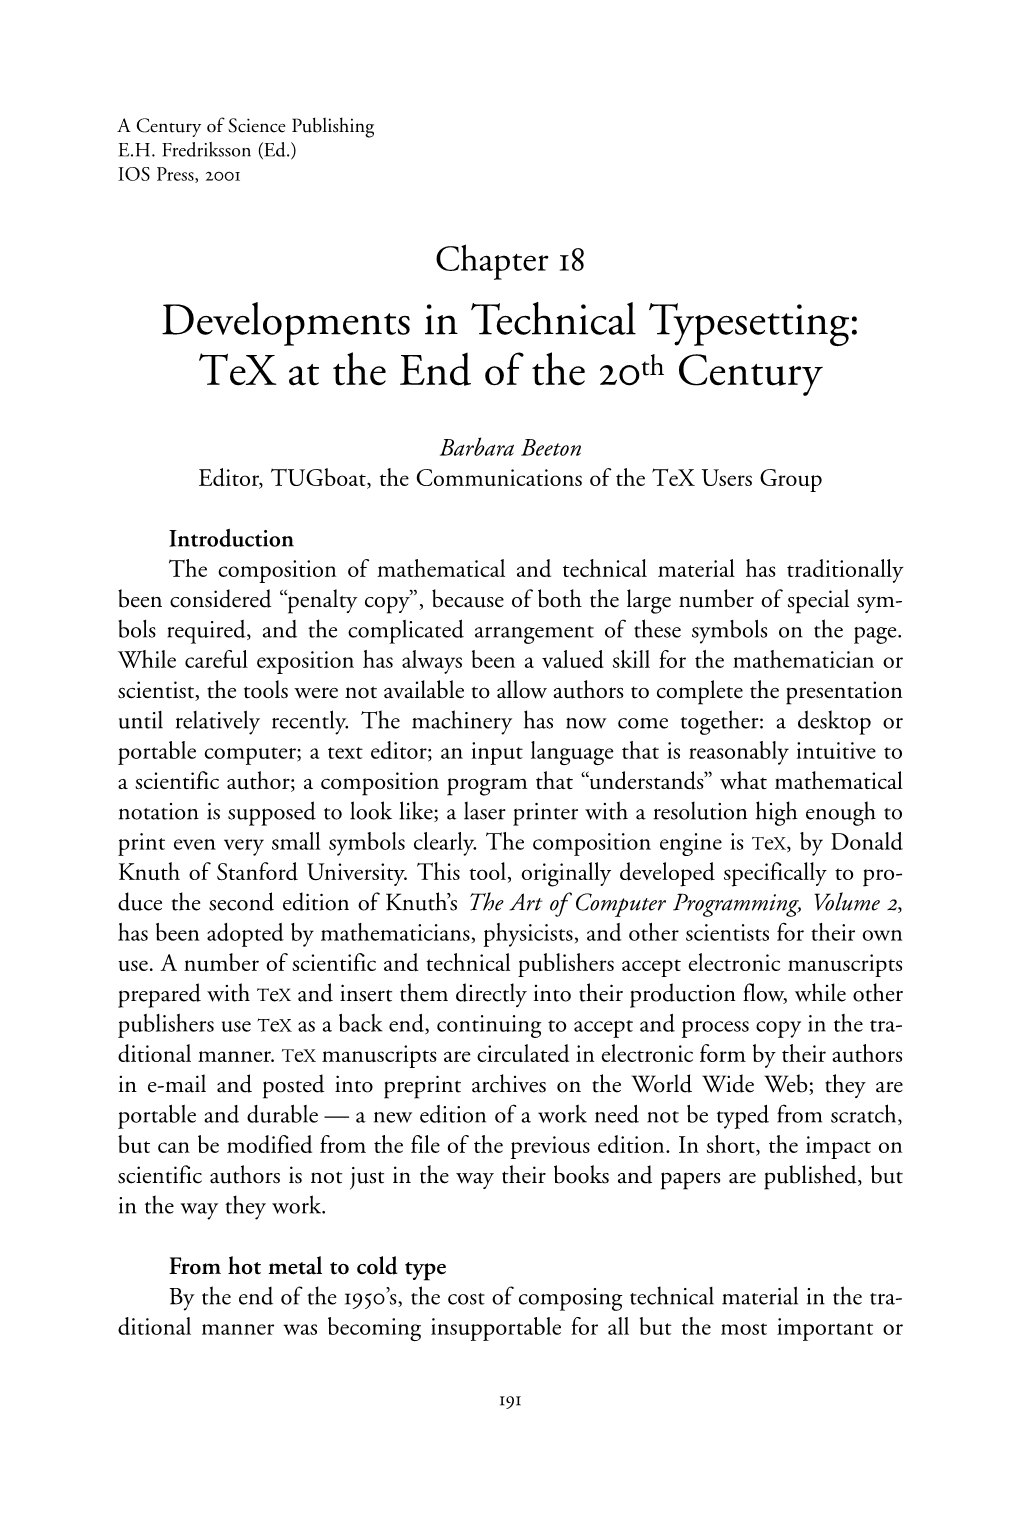 Developments in Technical Typesetting: Tex at the End of the Th Century